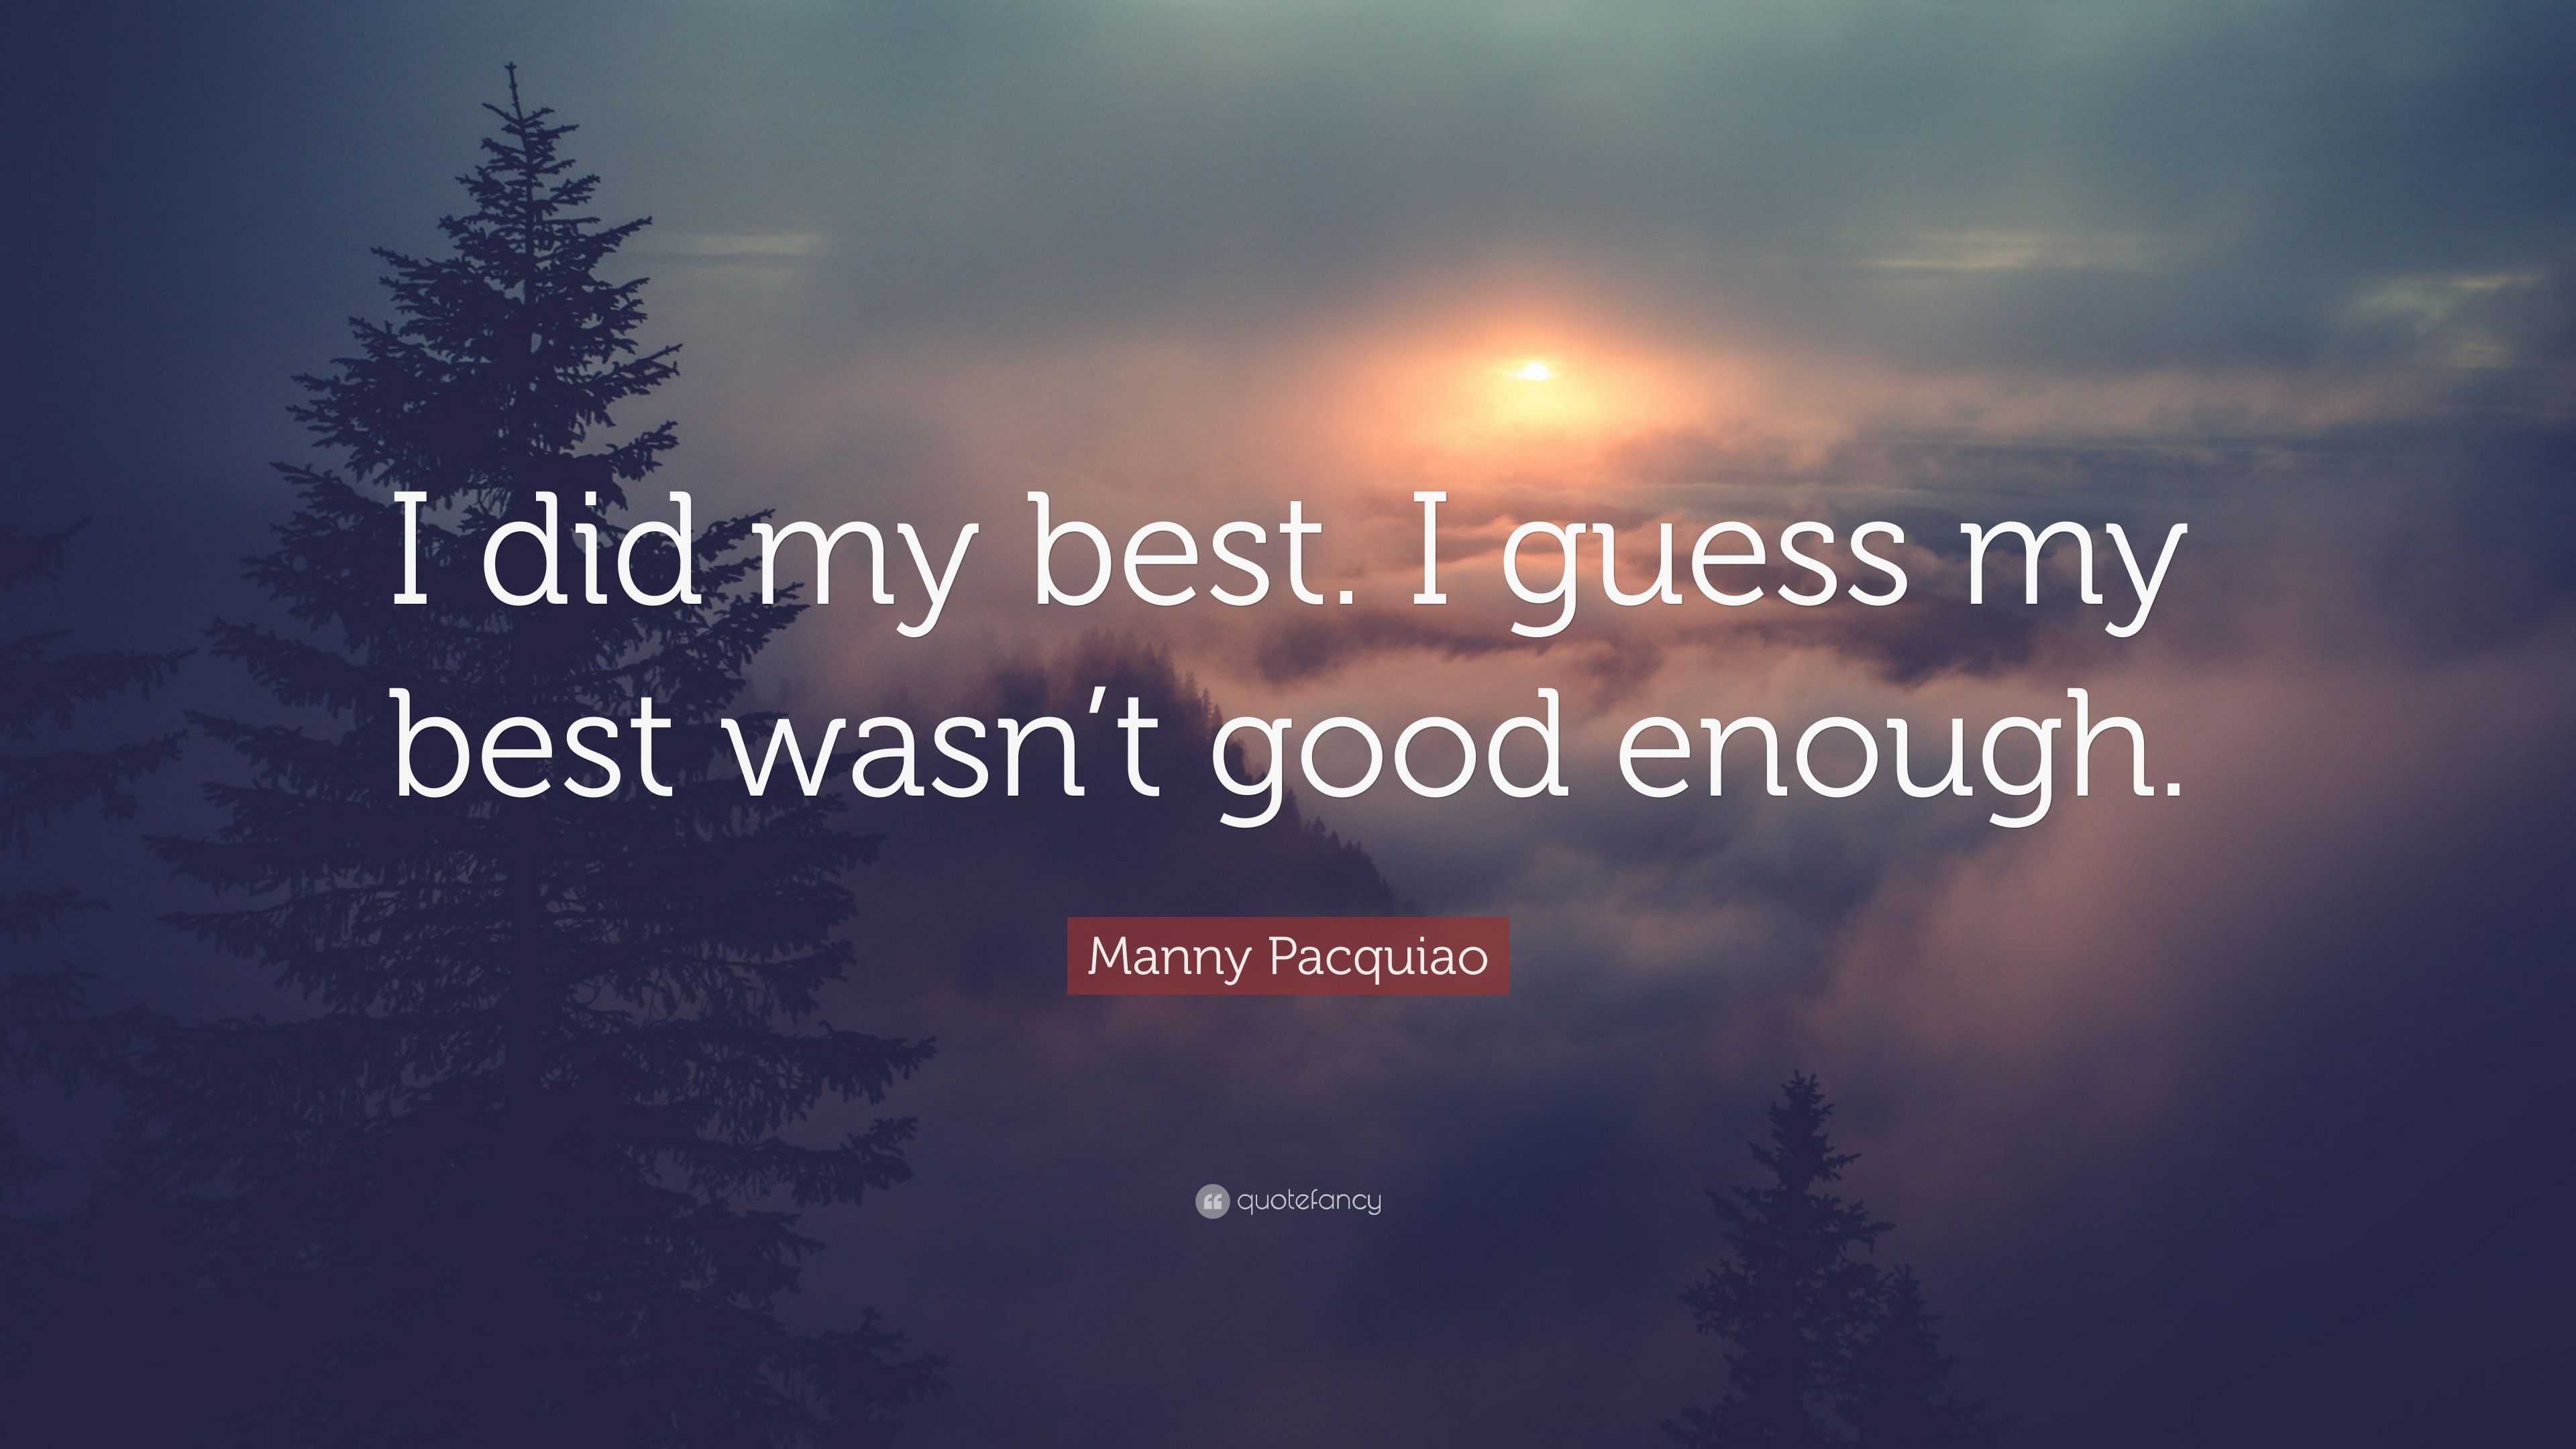 Manny Pacquiao Quote: “I did my I guess my best wasn't good enough.”